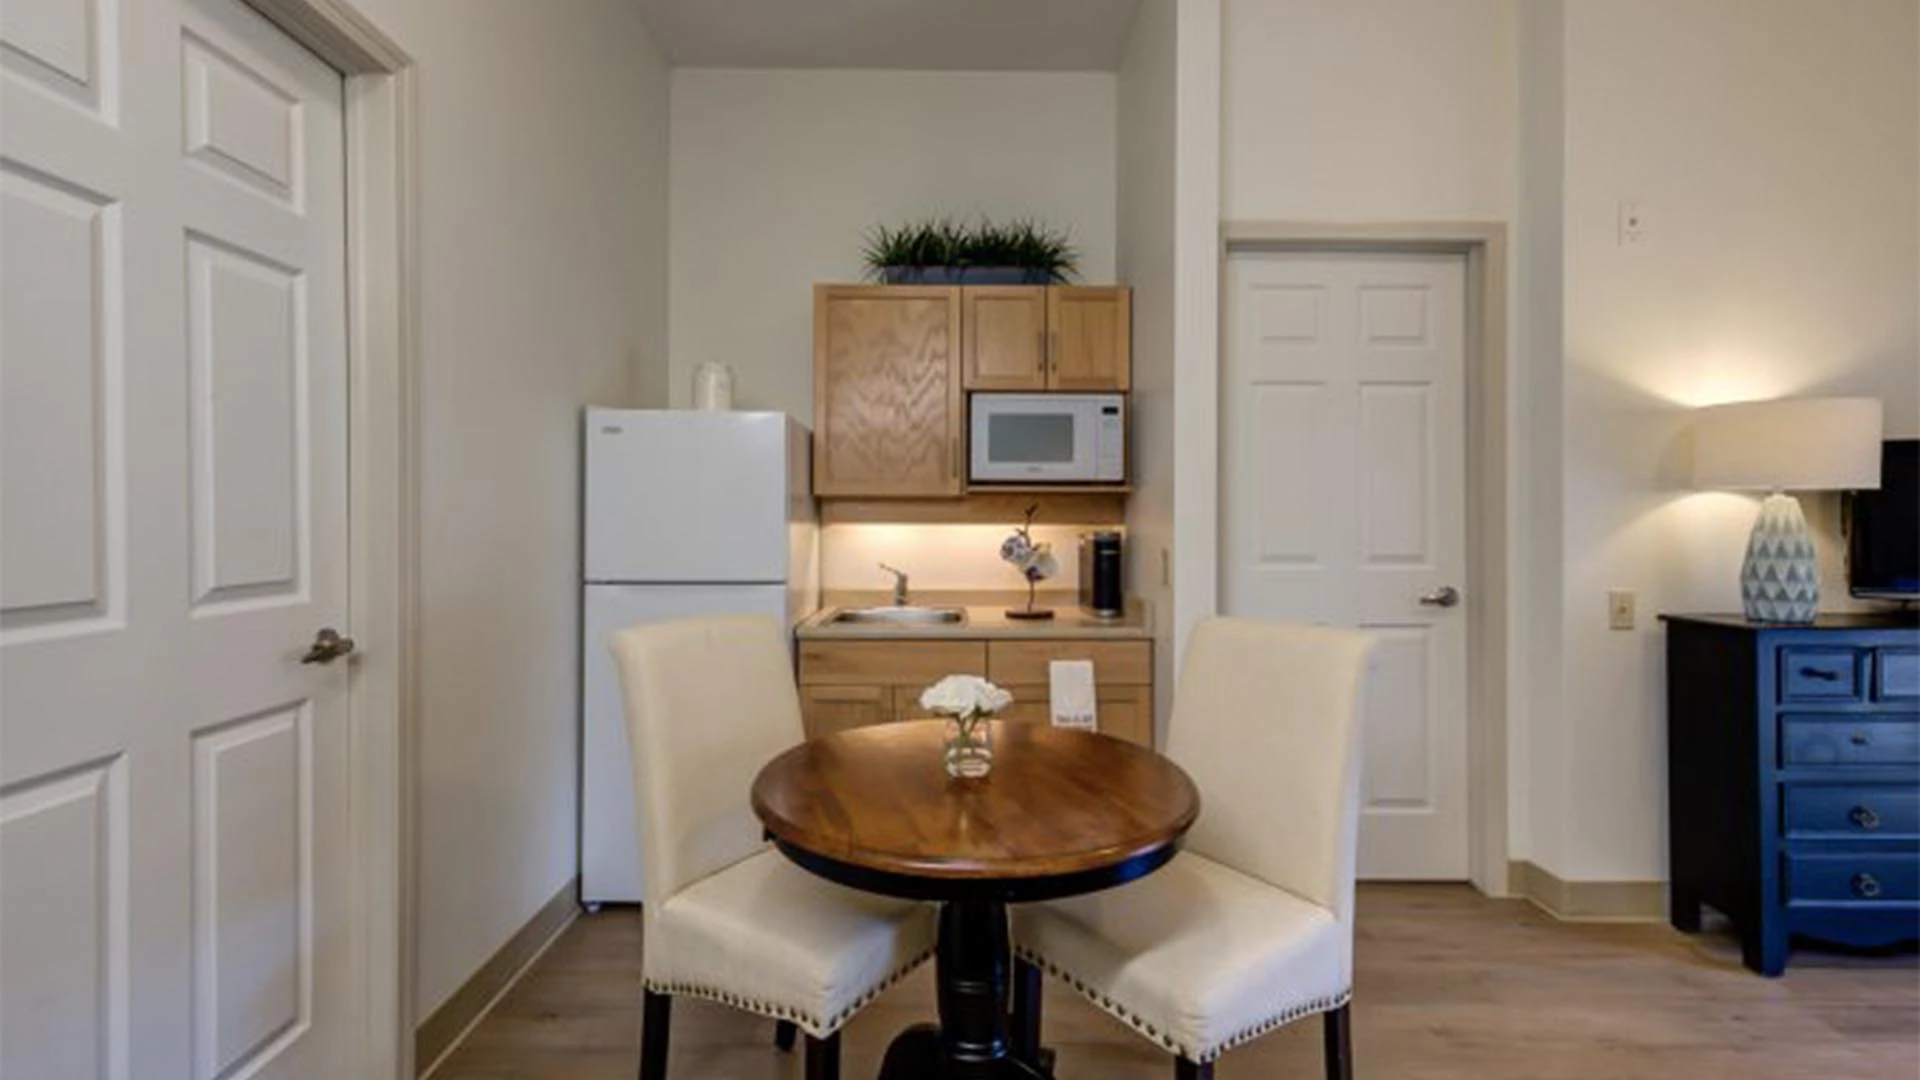 A Rutherford Heights senior apartments  kitchenette with fridge, sink, microwave, and table with chairs